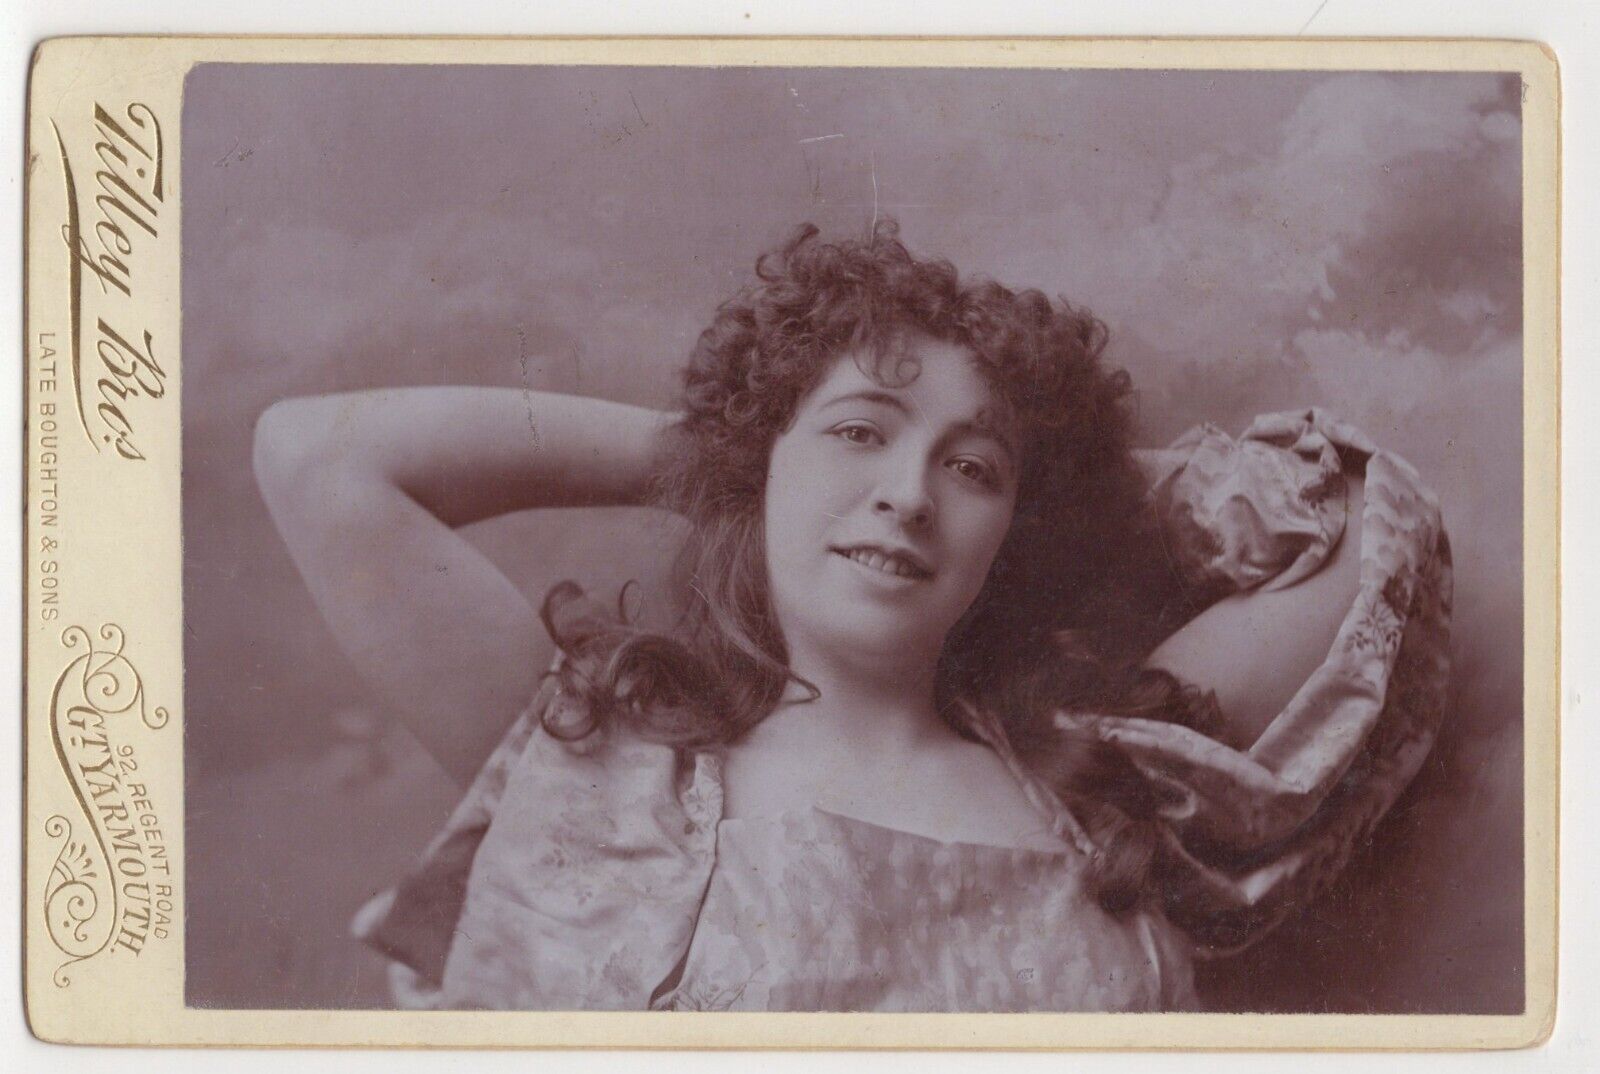 VICTORIAN BEAUTY ASKS “DO YOU THINK I’M SEXY?” : GREAT YARMOUTH : CABINET CARD